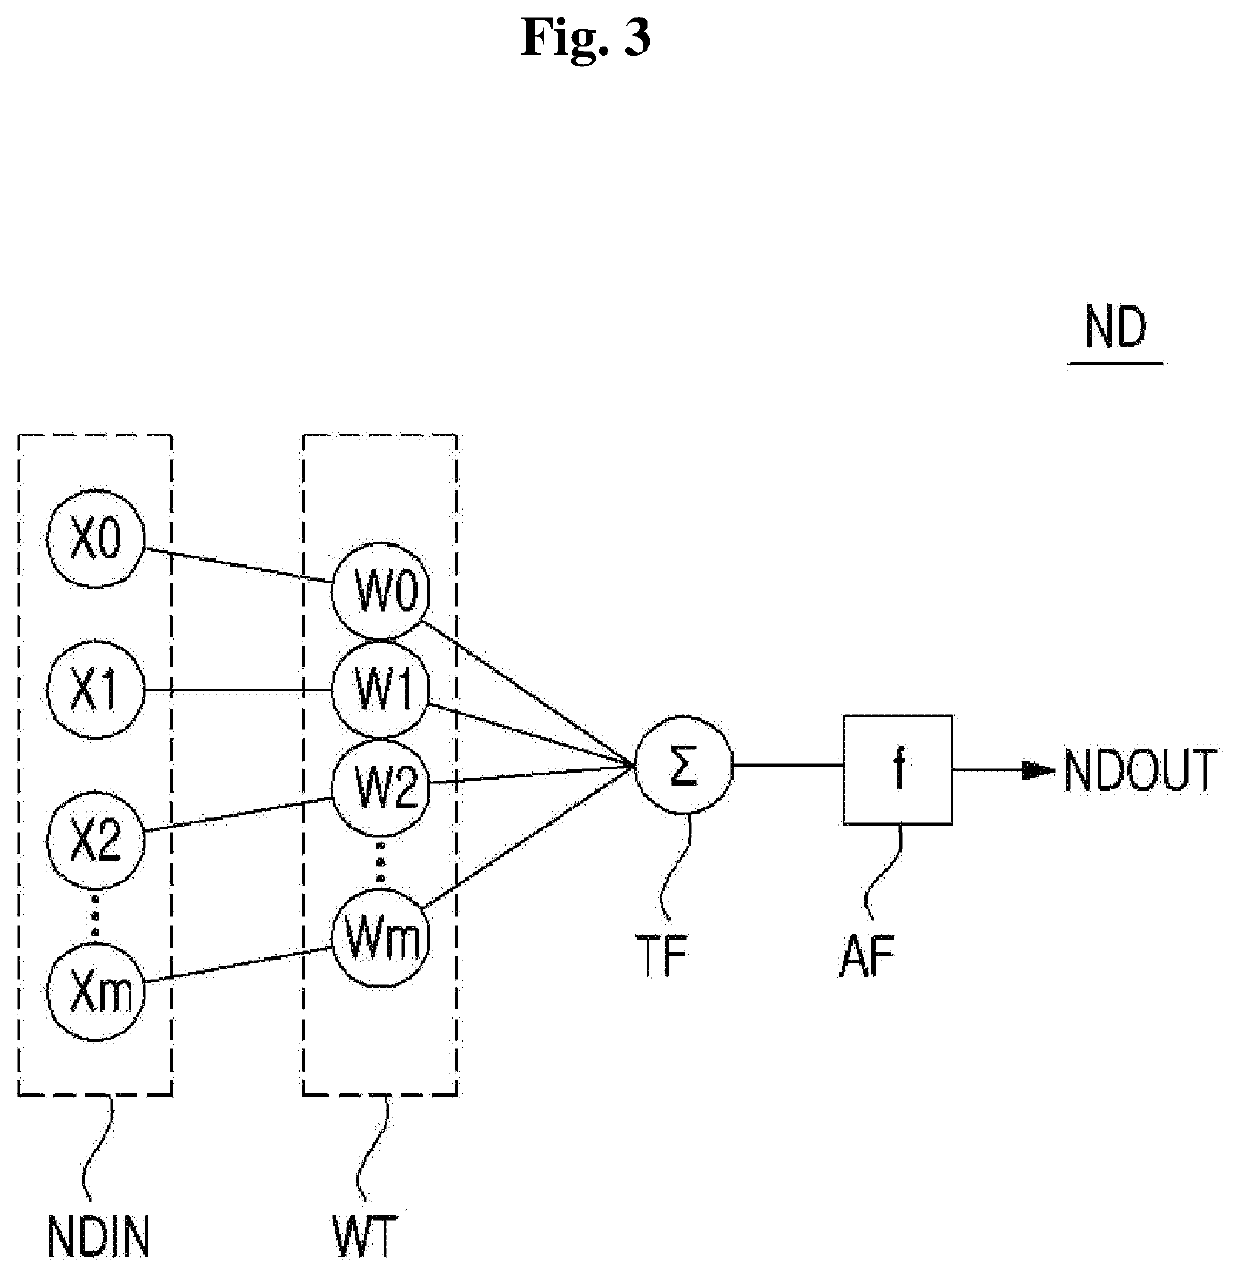 Artificial neural network system using a piecewise linear rectifier unit for compensating component defects